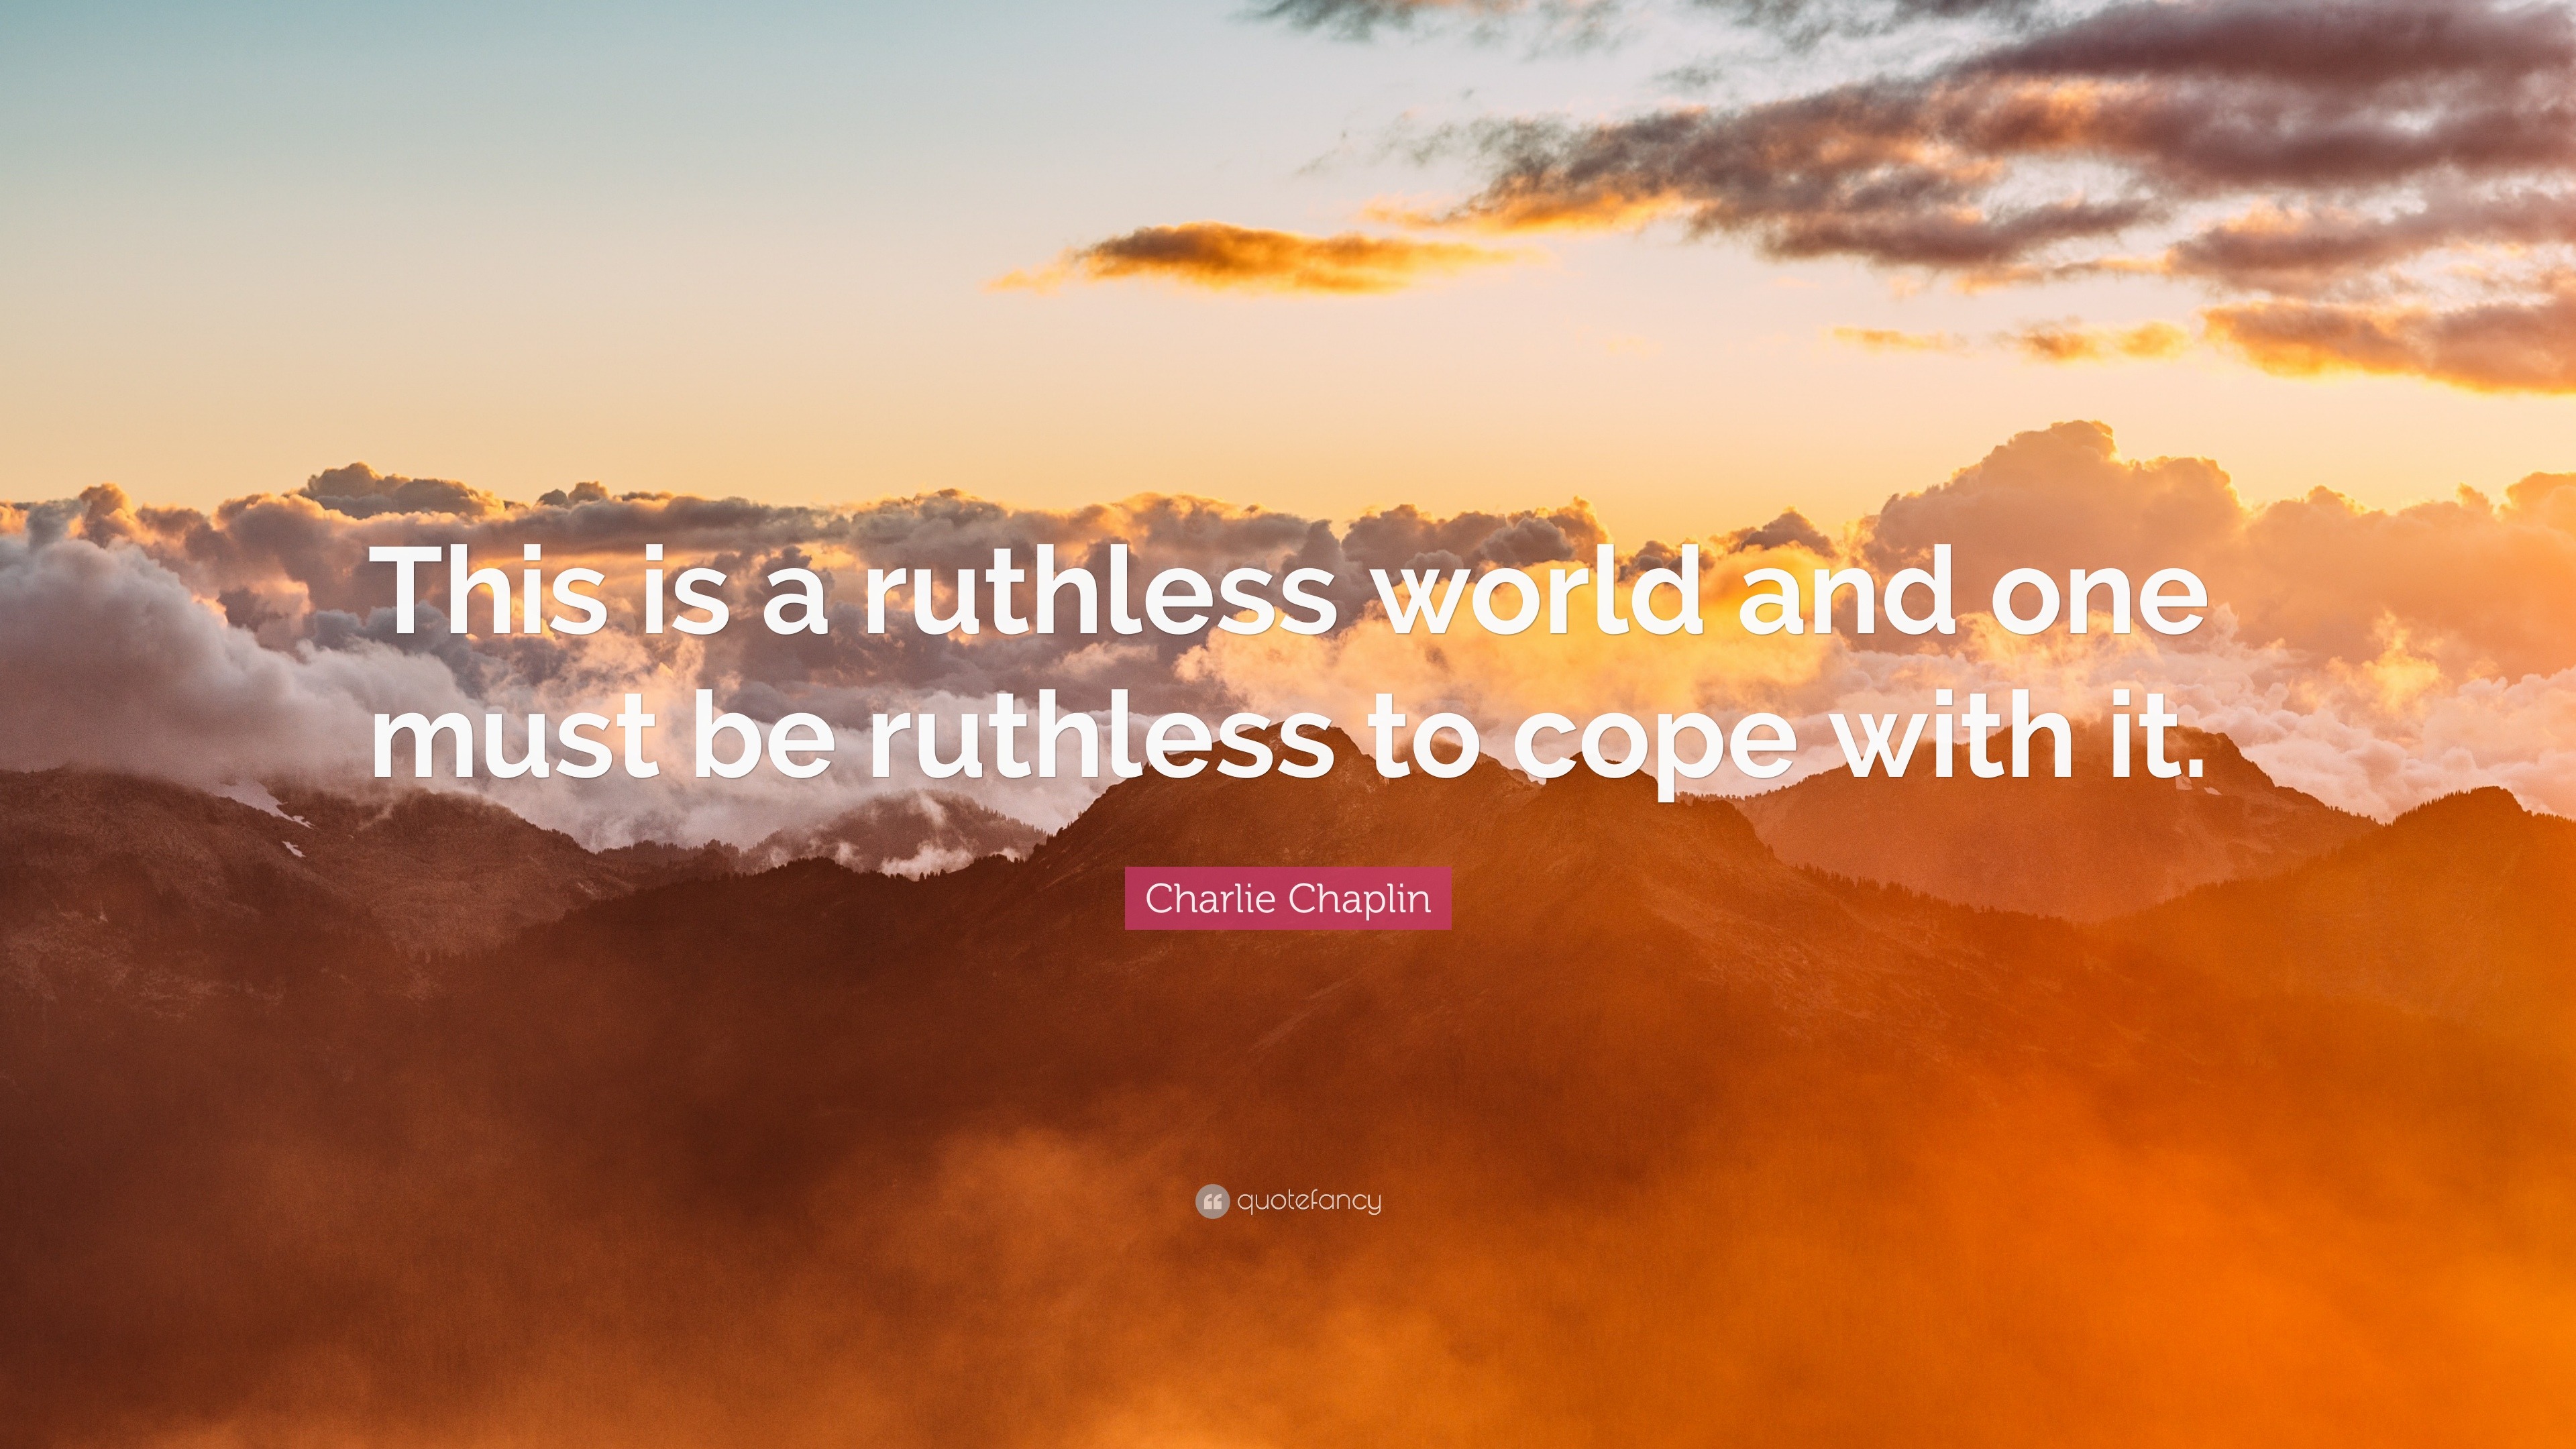 Charlie Chaplin Quote: “This is a ruthless world and one must be ruthless to cope with it.”